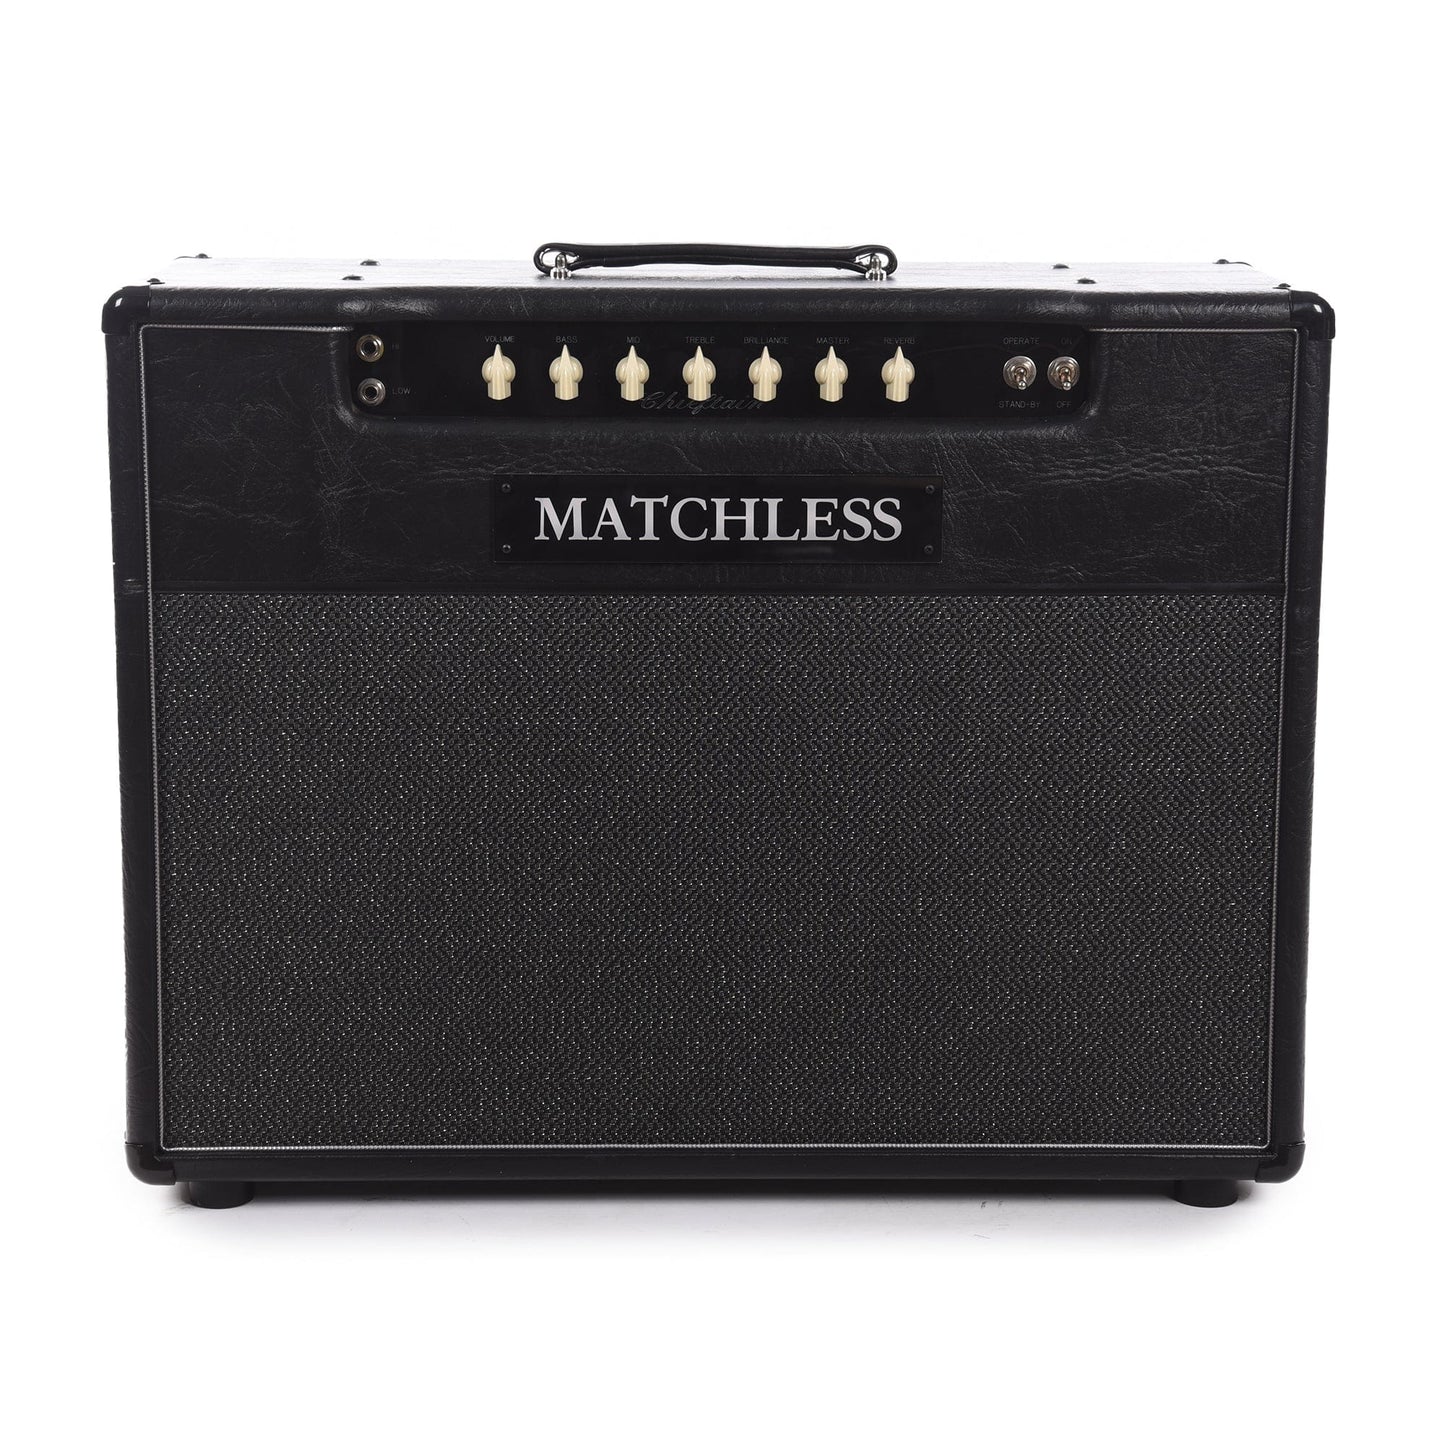 Matchless Chieftan Reverb 40W 2x12" Combo Black Amps / Guitar Combos